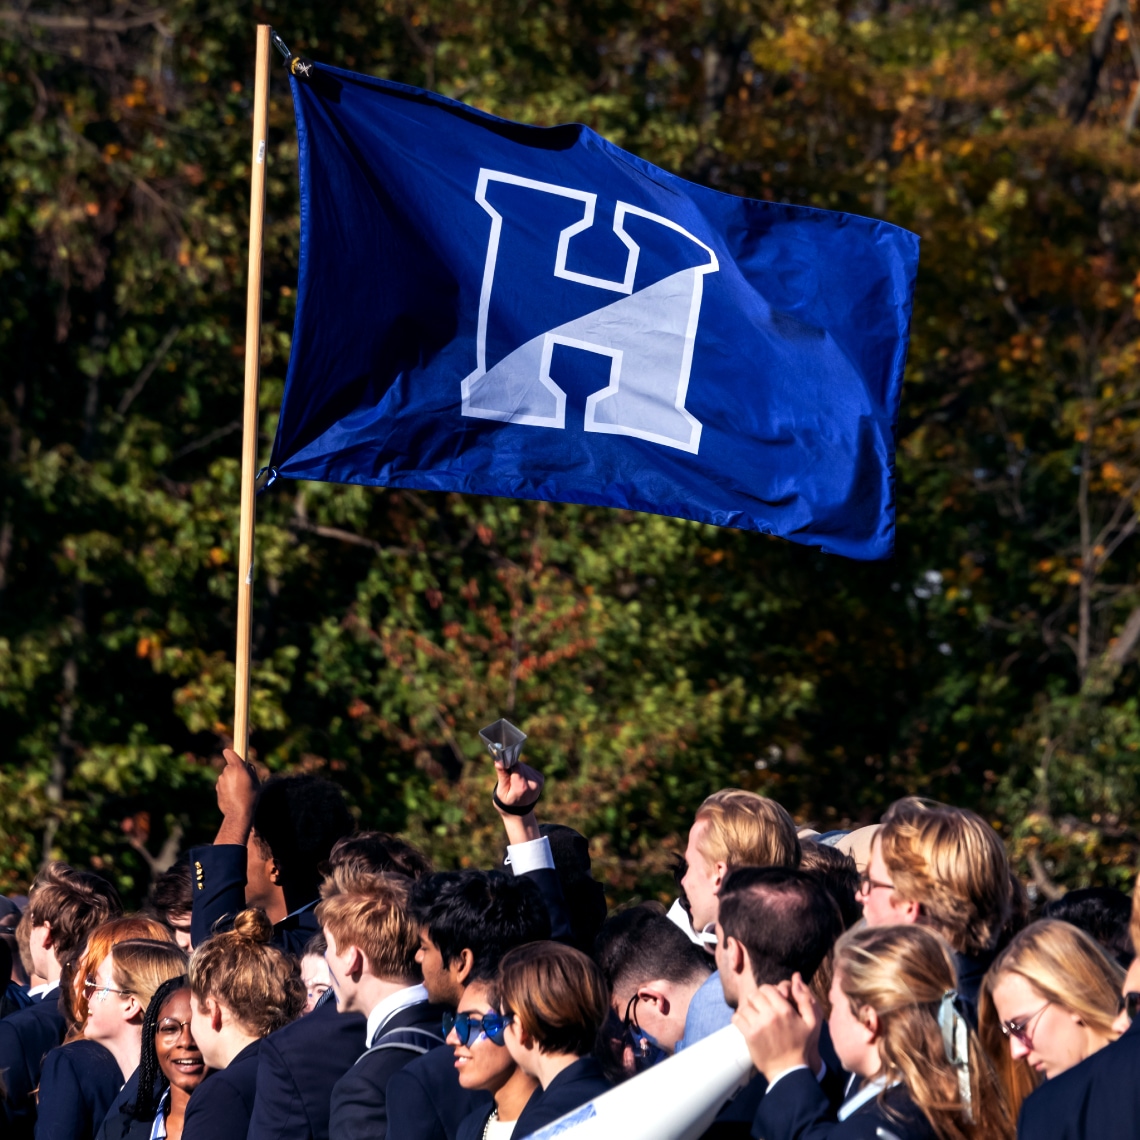 a group of younf students holding a blue flag with the Athletic Logo